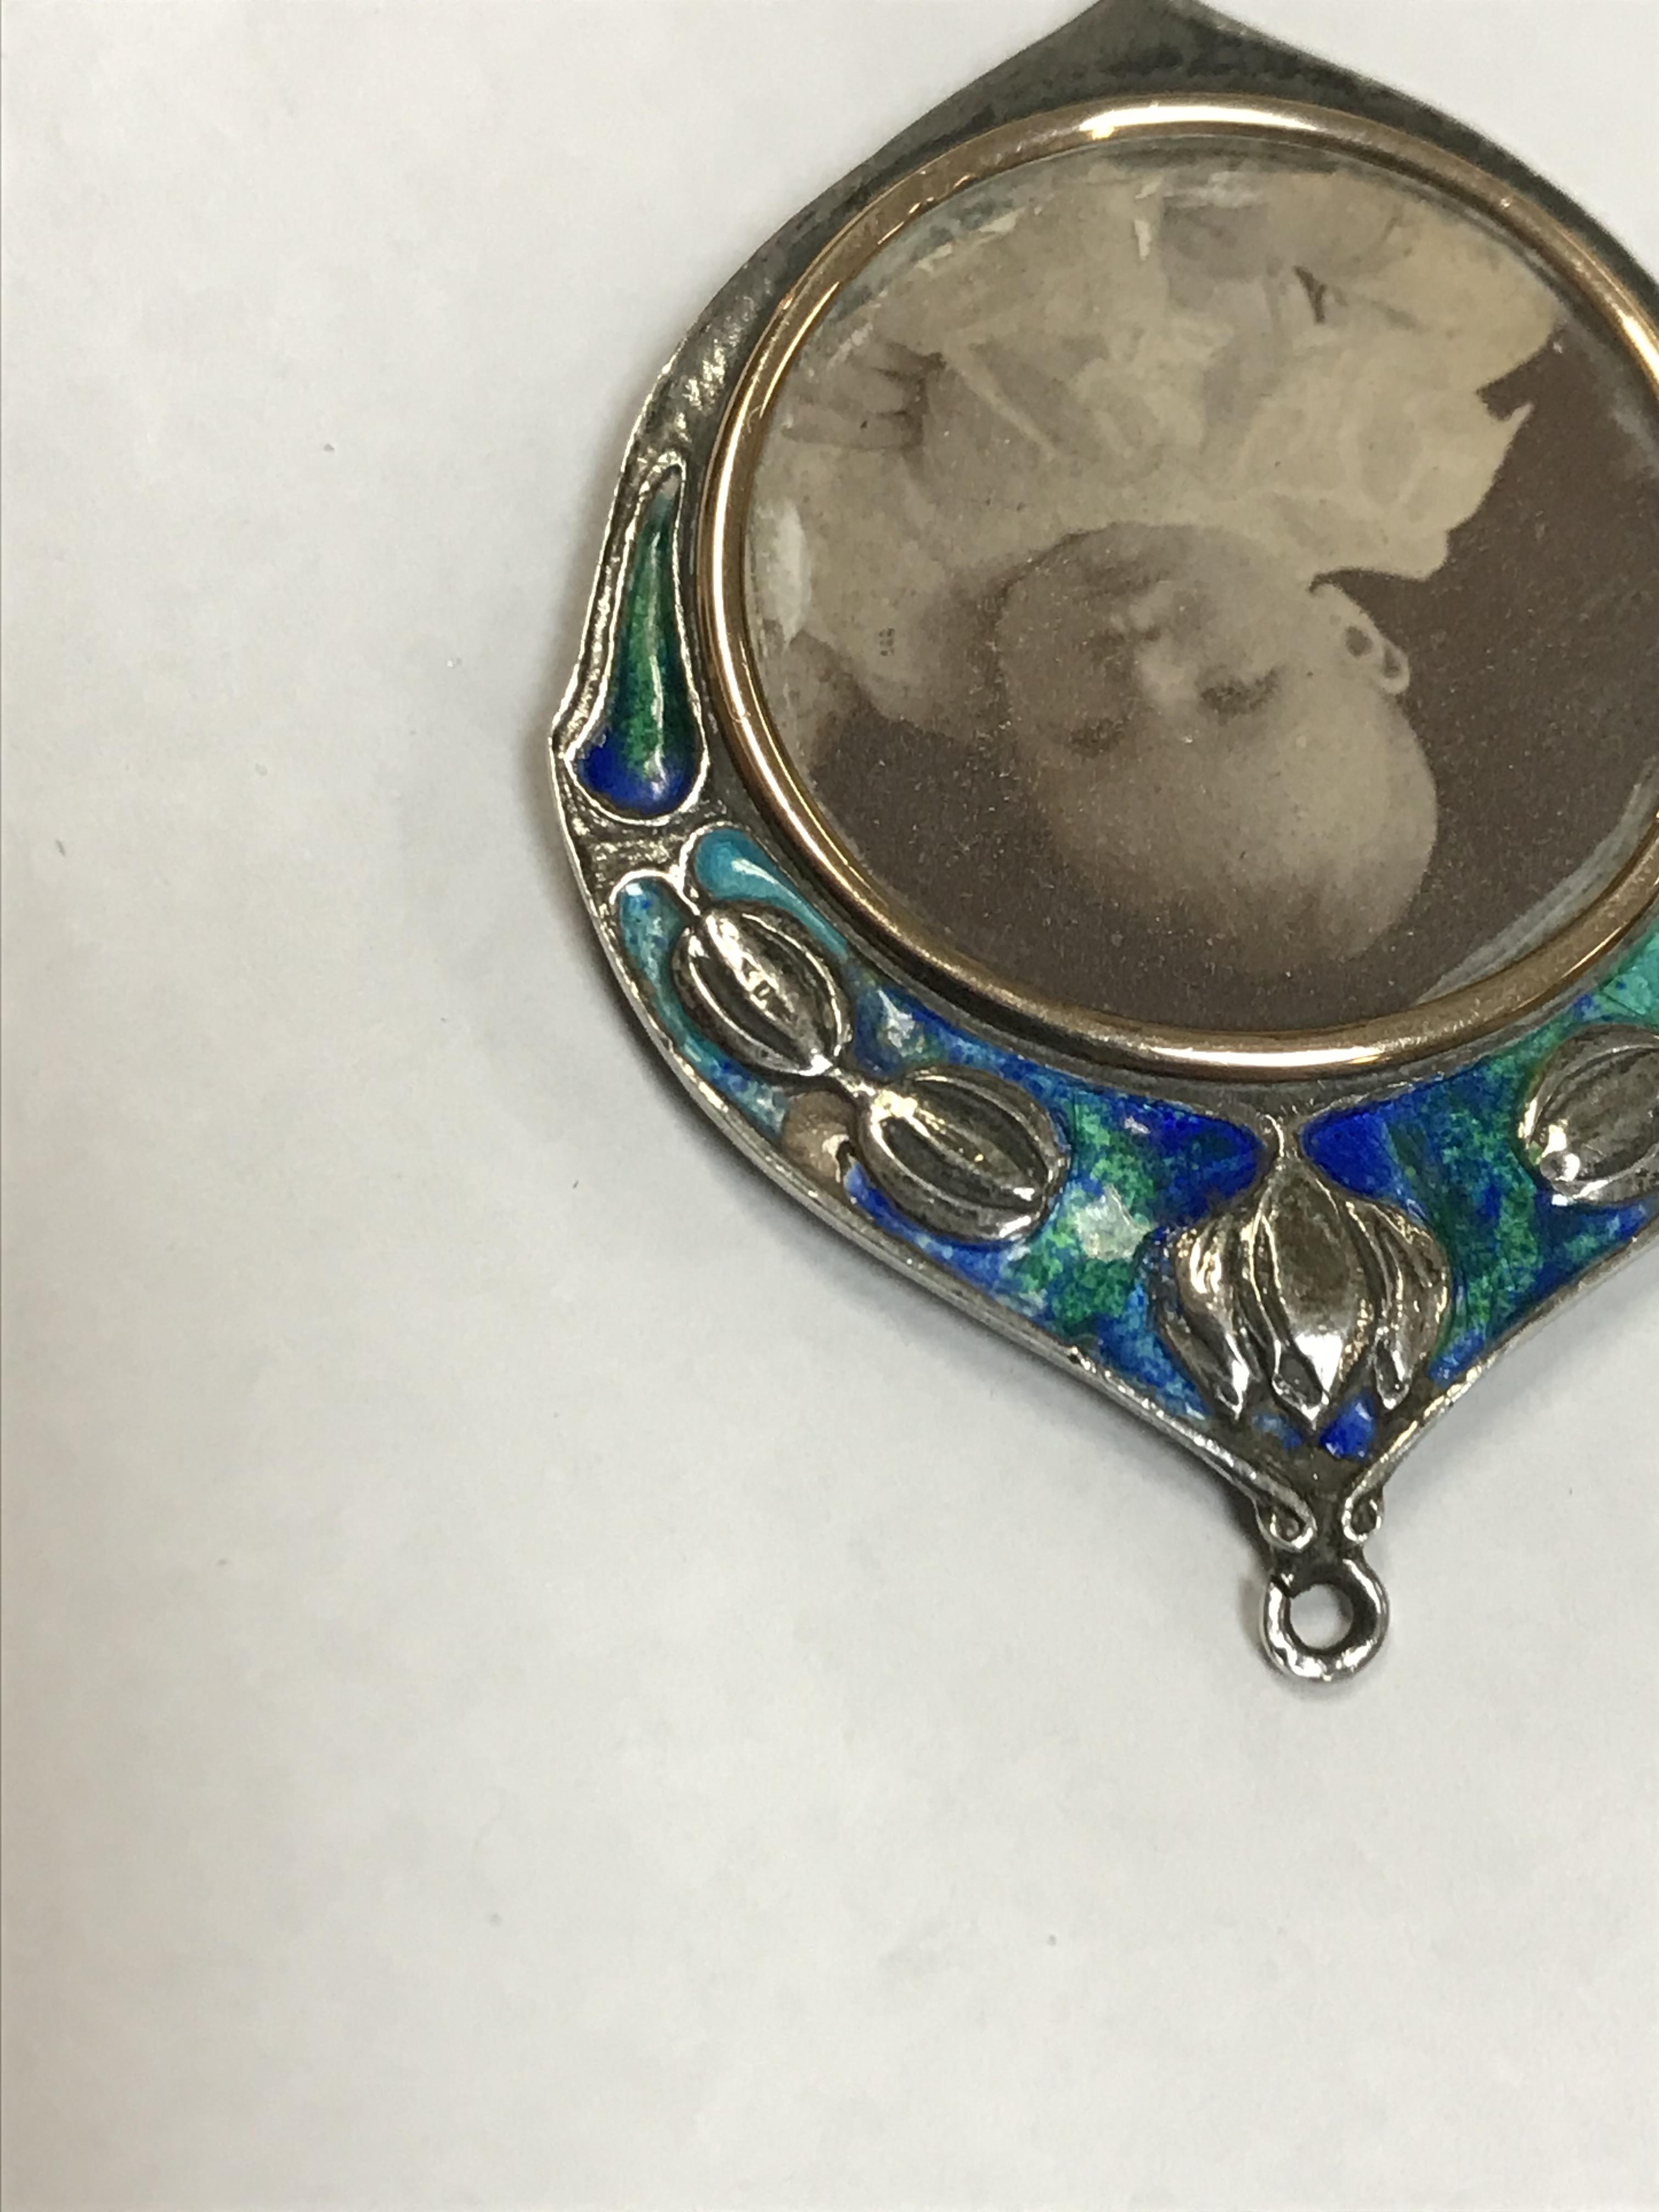 An Edwardian silver and enamel decorated pendant set with pendant locket (by William Hair Haseler, - Image 9 of 11